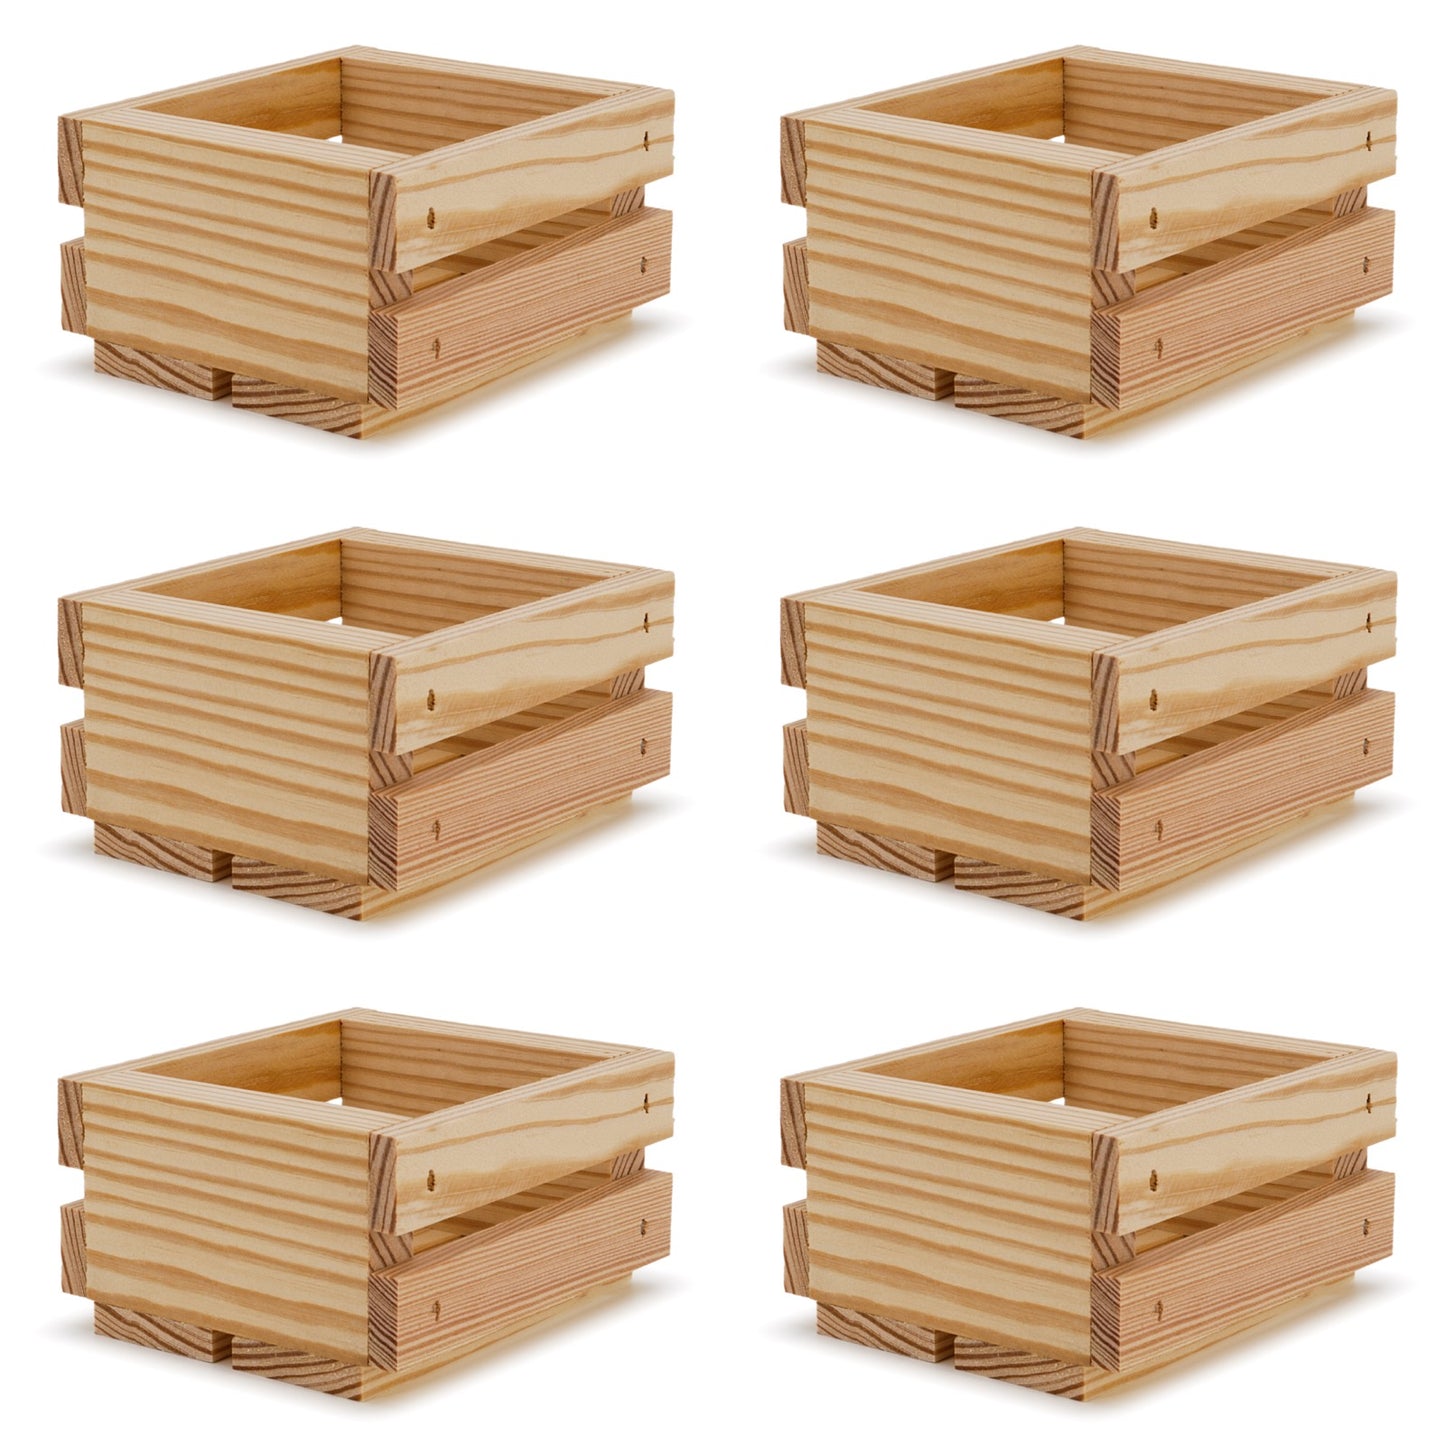 6 Small wooden crates 4x4x2.5